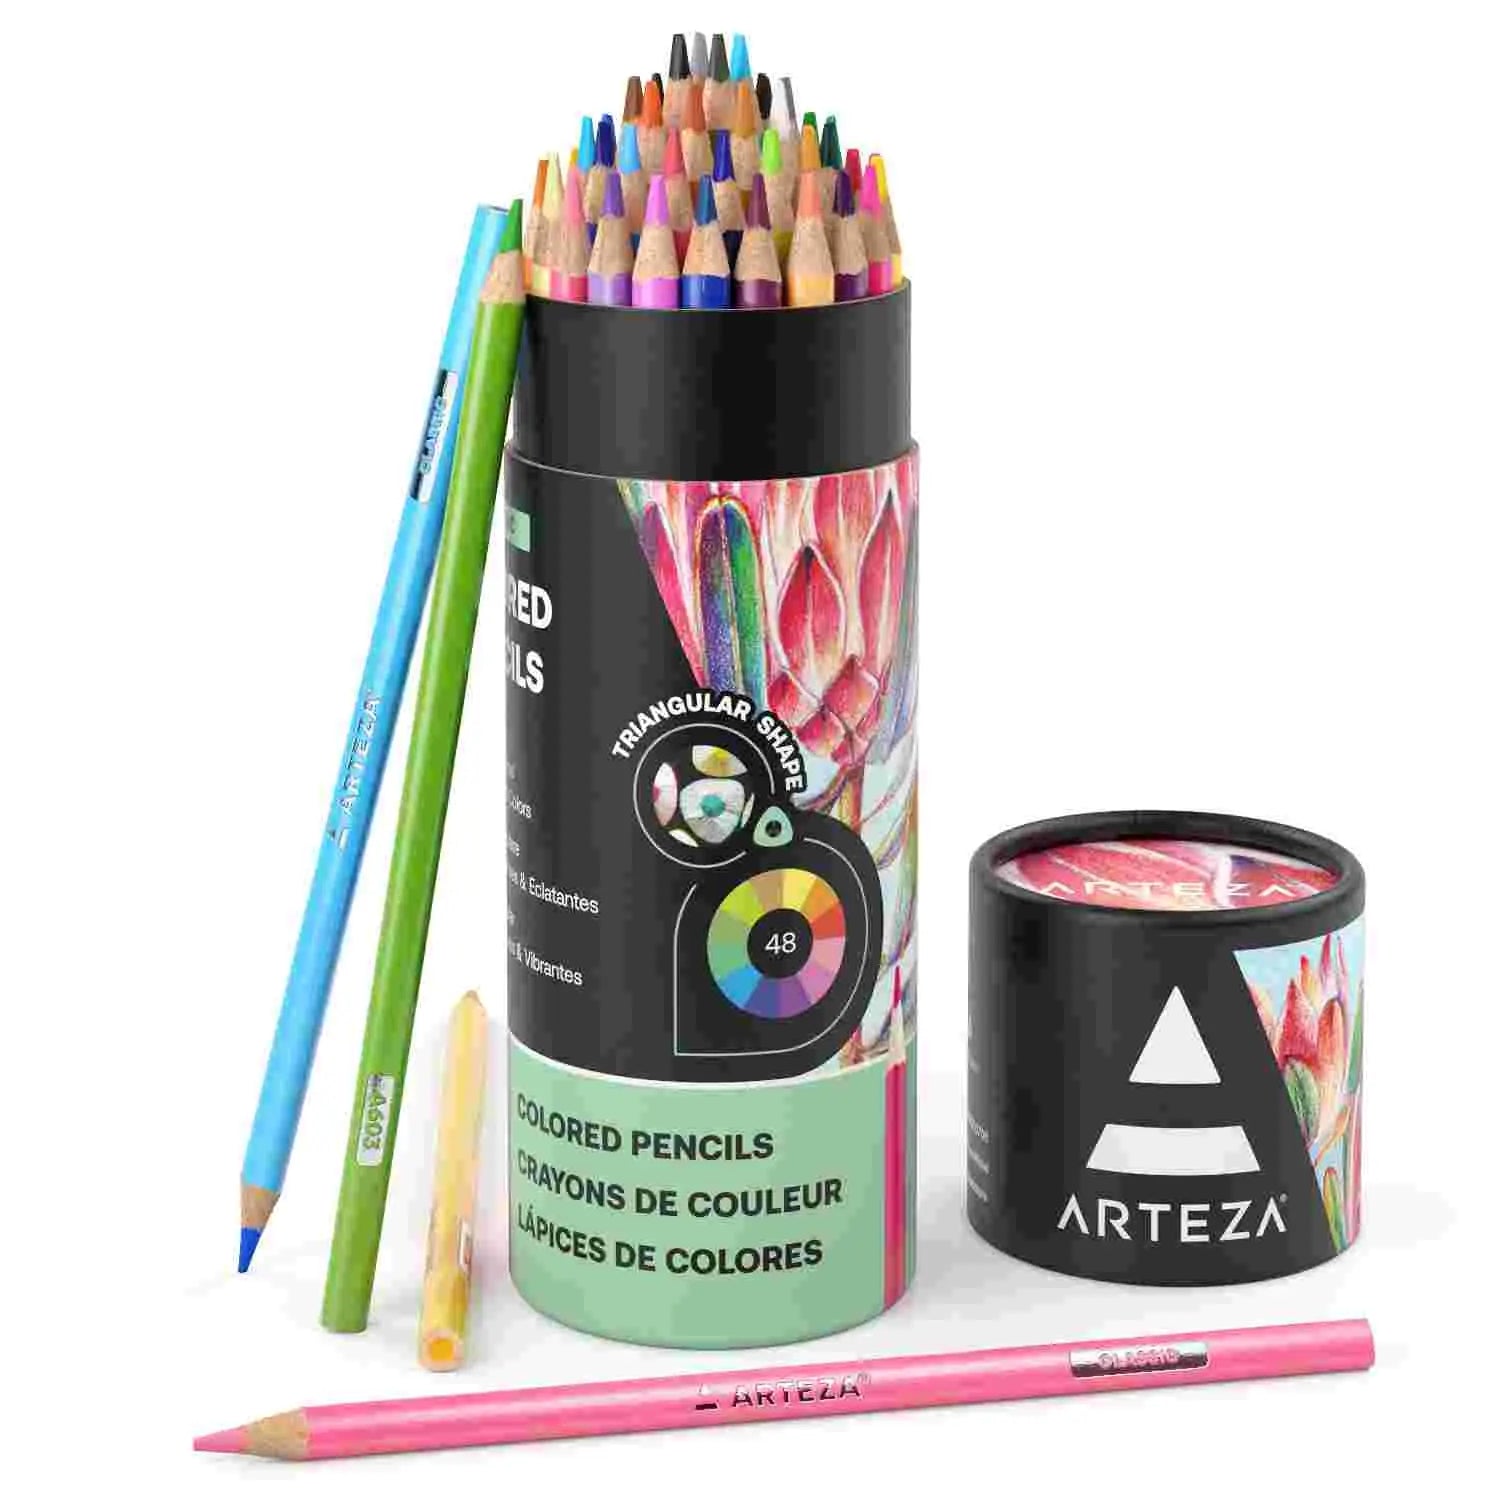 Colored Pencils for Adult Coloring, 8 Colors Magic Jumbo Colored